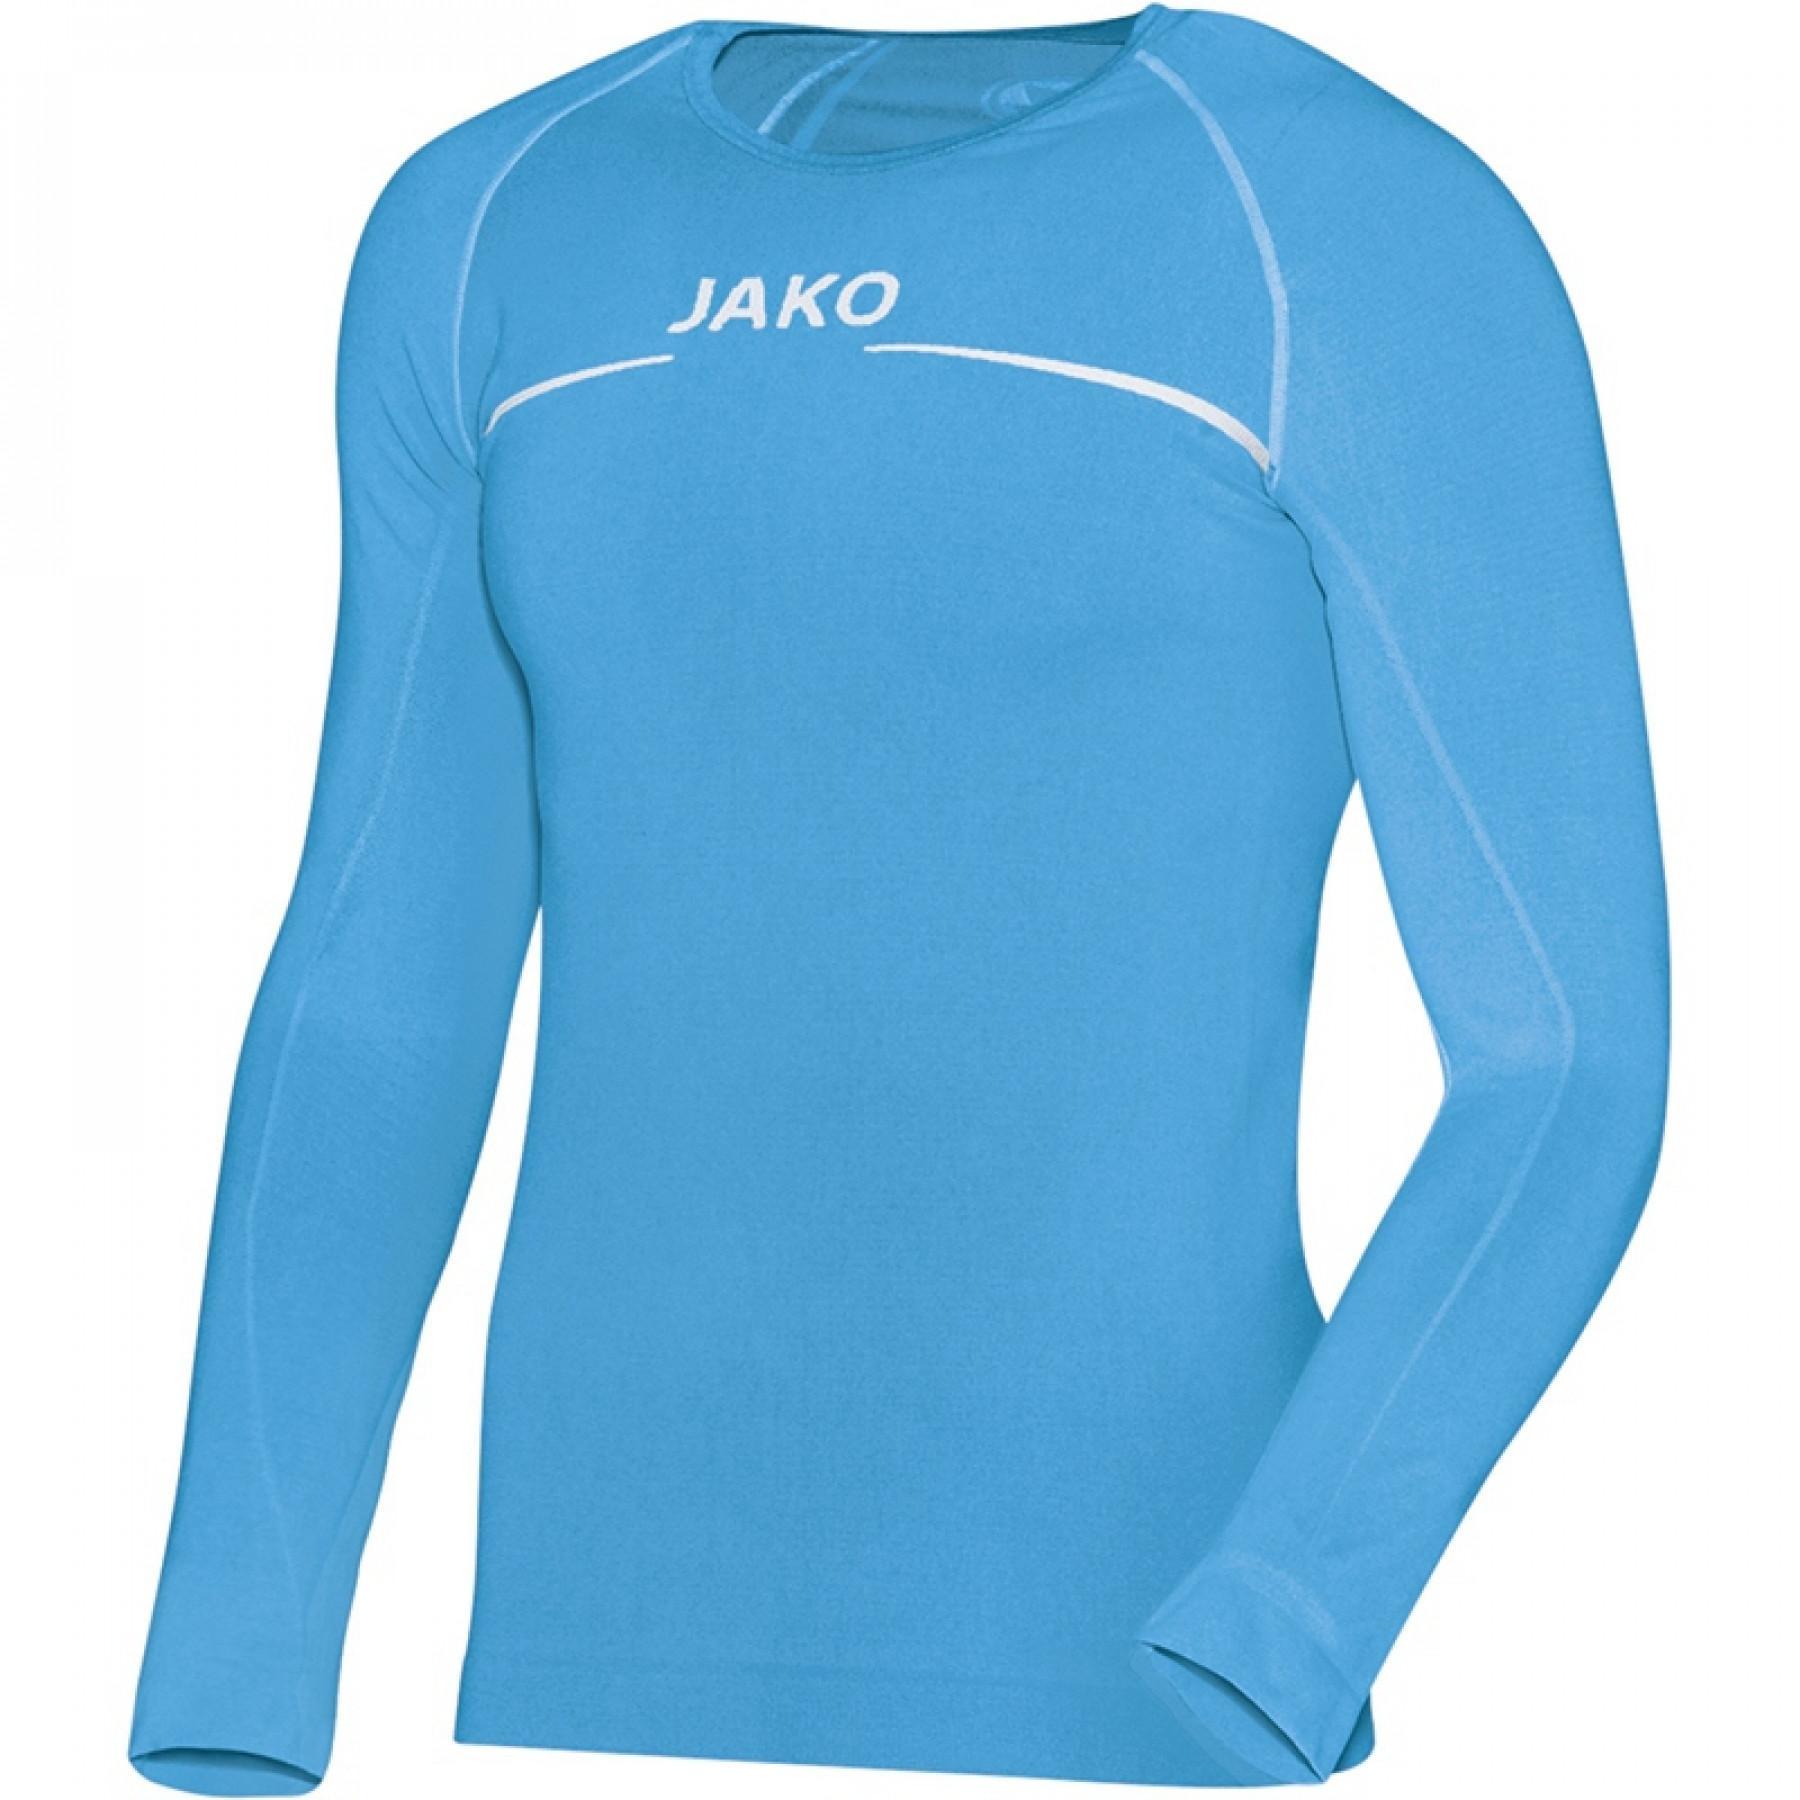 Jersey Jako Comfort manches longues